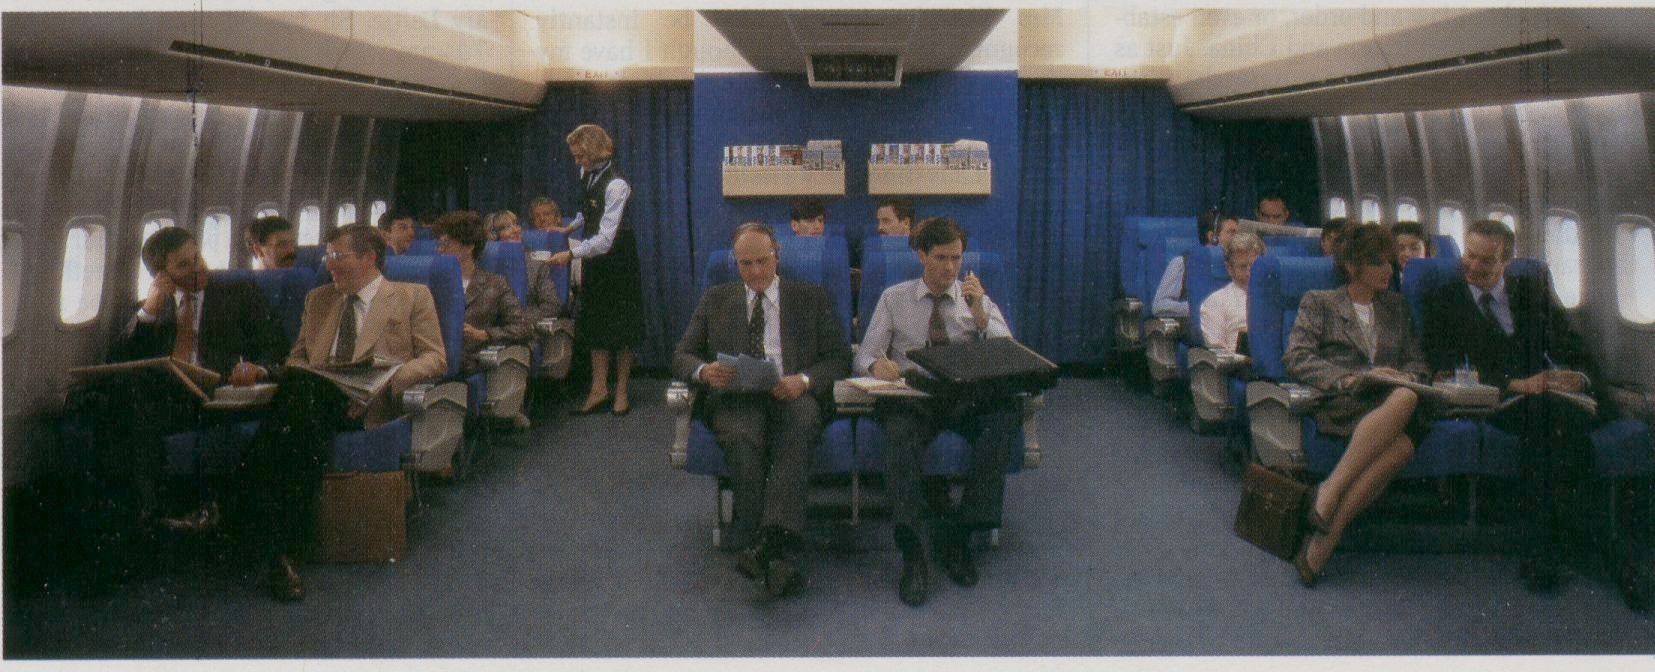 1986 When Pan Am converted the Clipper Class (Business Class) cabin from 8 across to 6 across seating bright blue seat covers were adopted as seen in this photo.  In 1988 Pan Am converted the business class  seat covers to a more demure herringbone pattern.